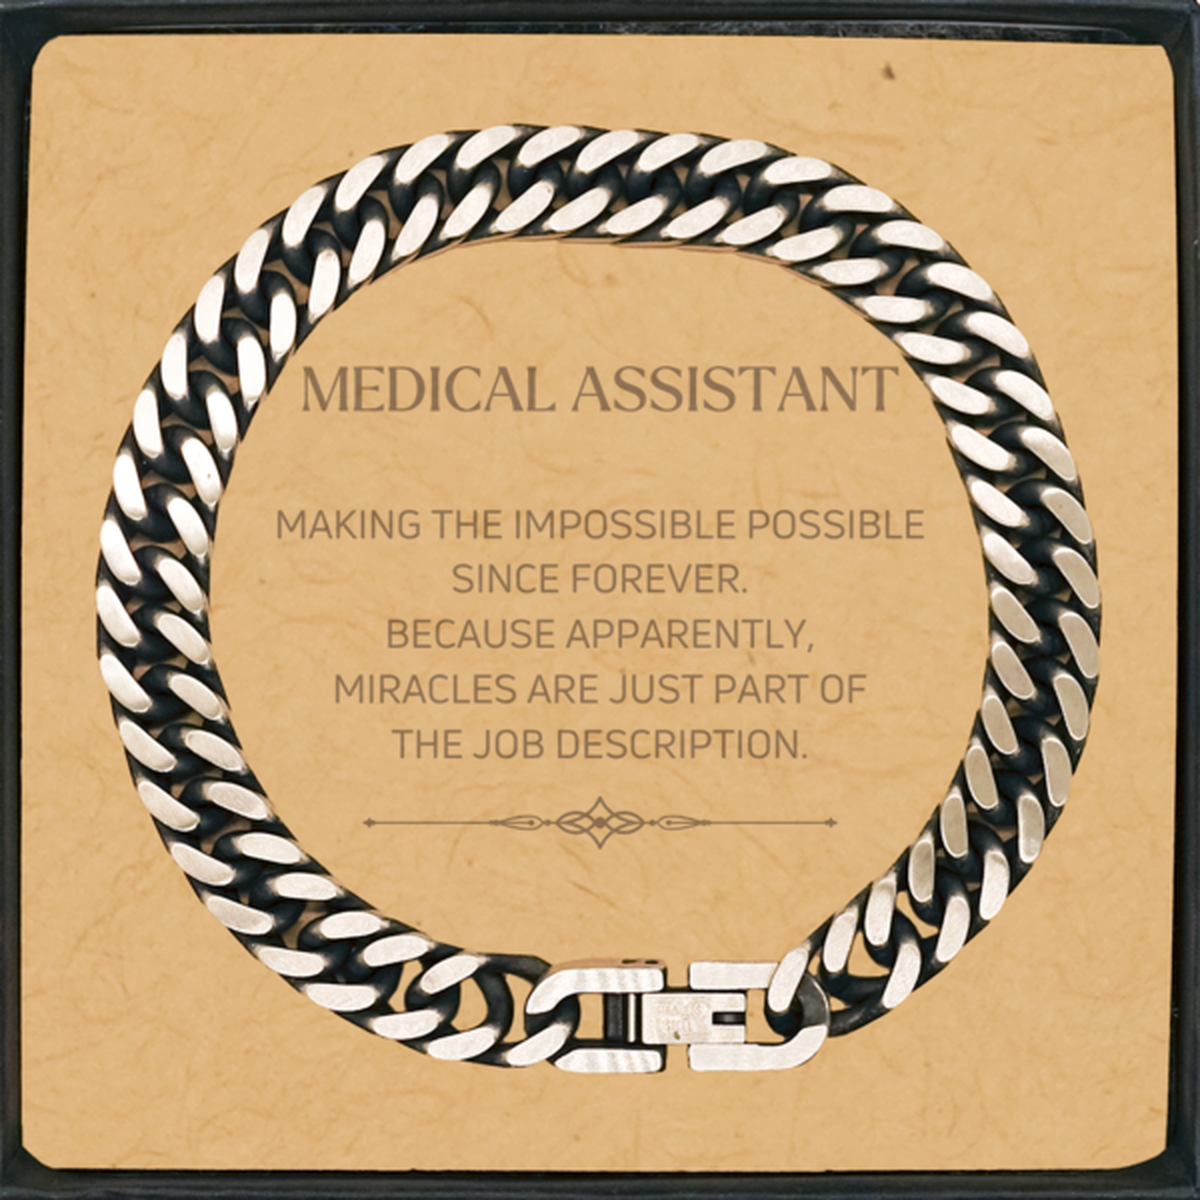 Funny Medical Assistant Gifts, Miracles are just part of the job description, Inspirational Birthday Cuban Link Chain Bracelet For Medical Assistant, Men, Women, Coworkers, Friends, Boss